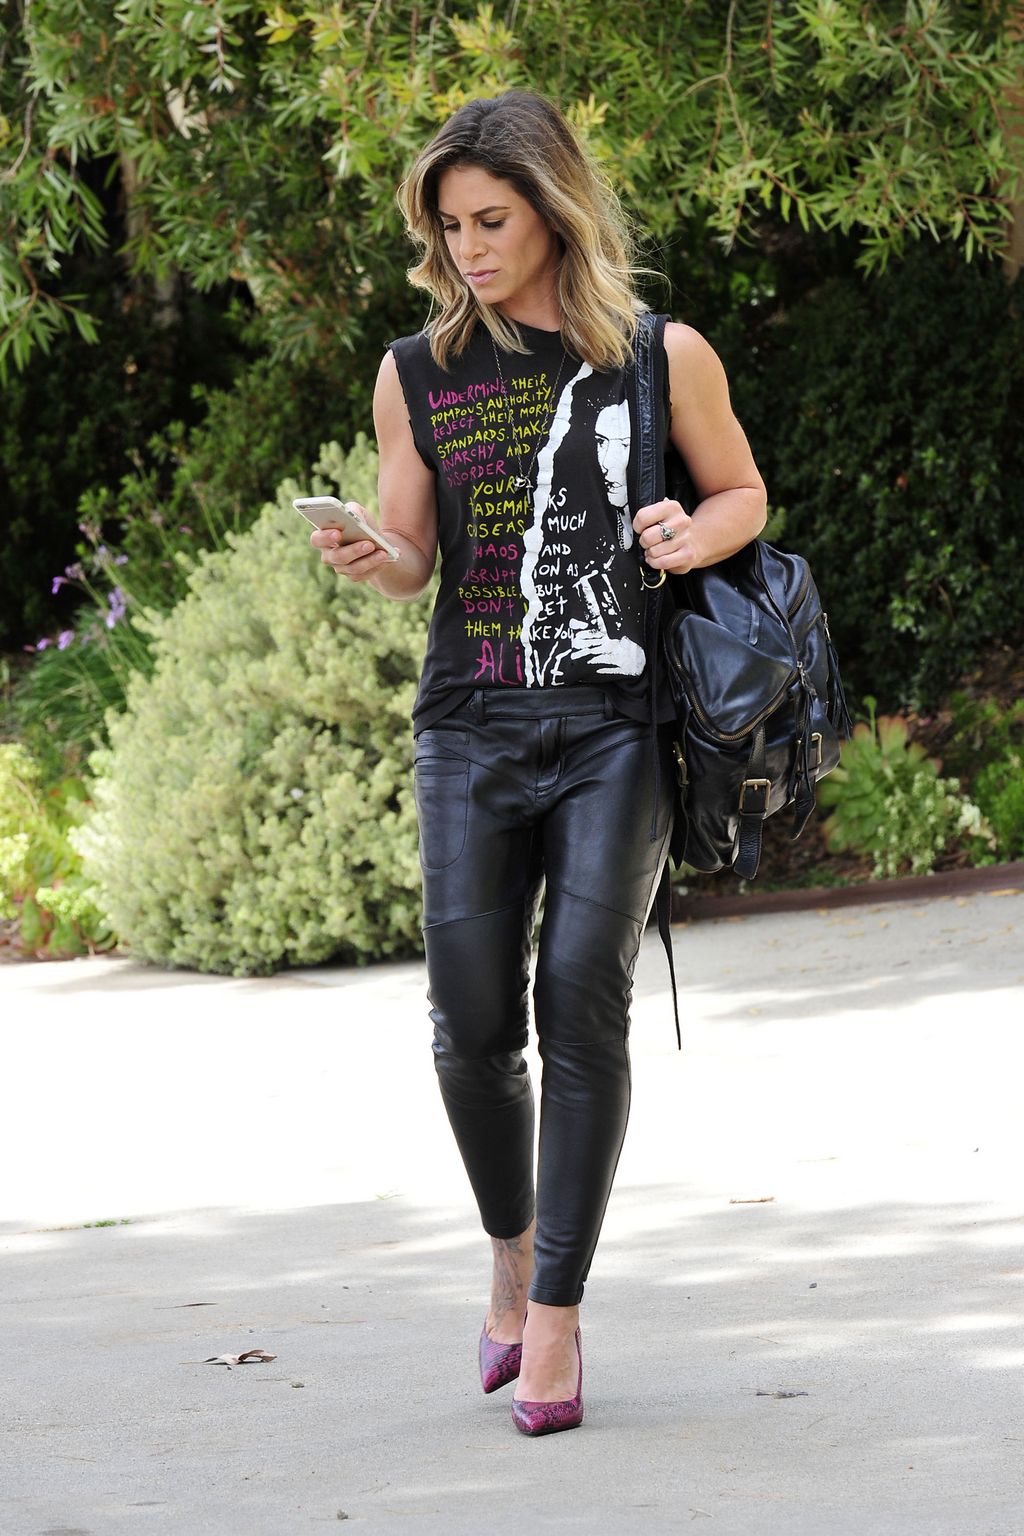 Jillian Michaels out and about in Malibu